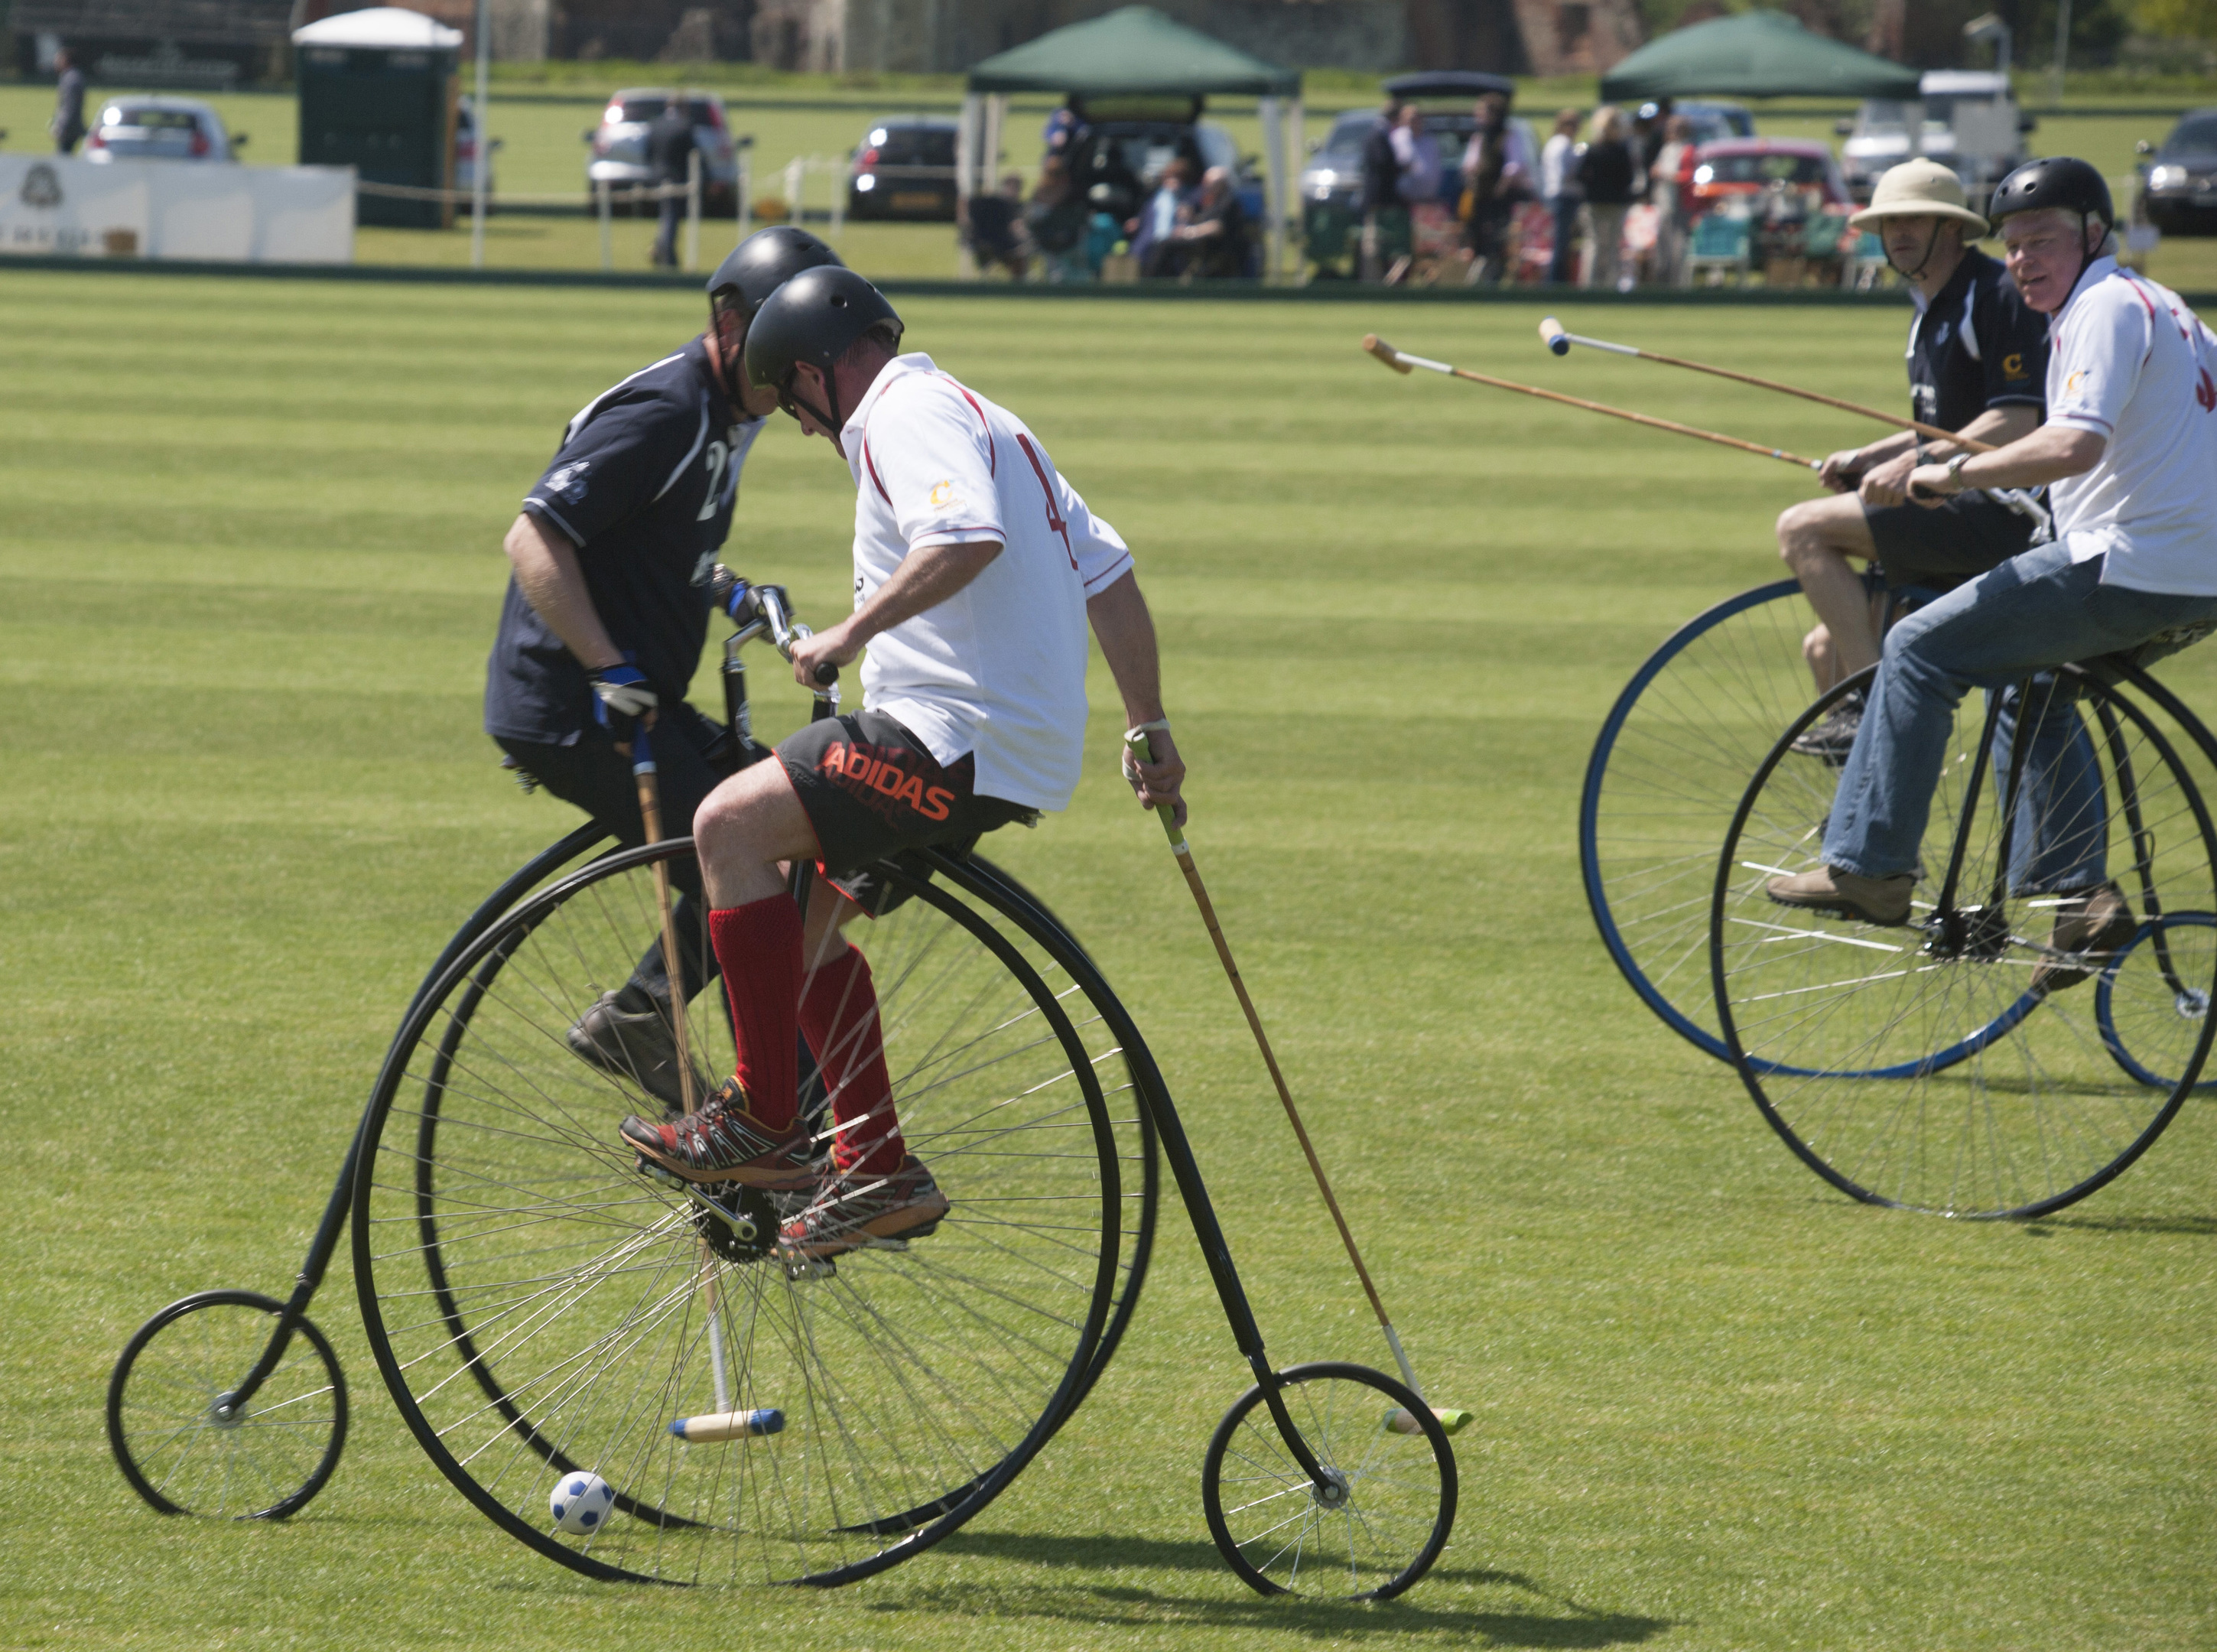 Penny-farthing polo match between England and Scotland (Graham Franks Photography)